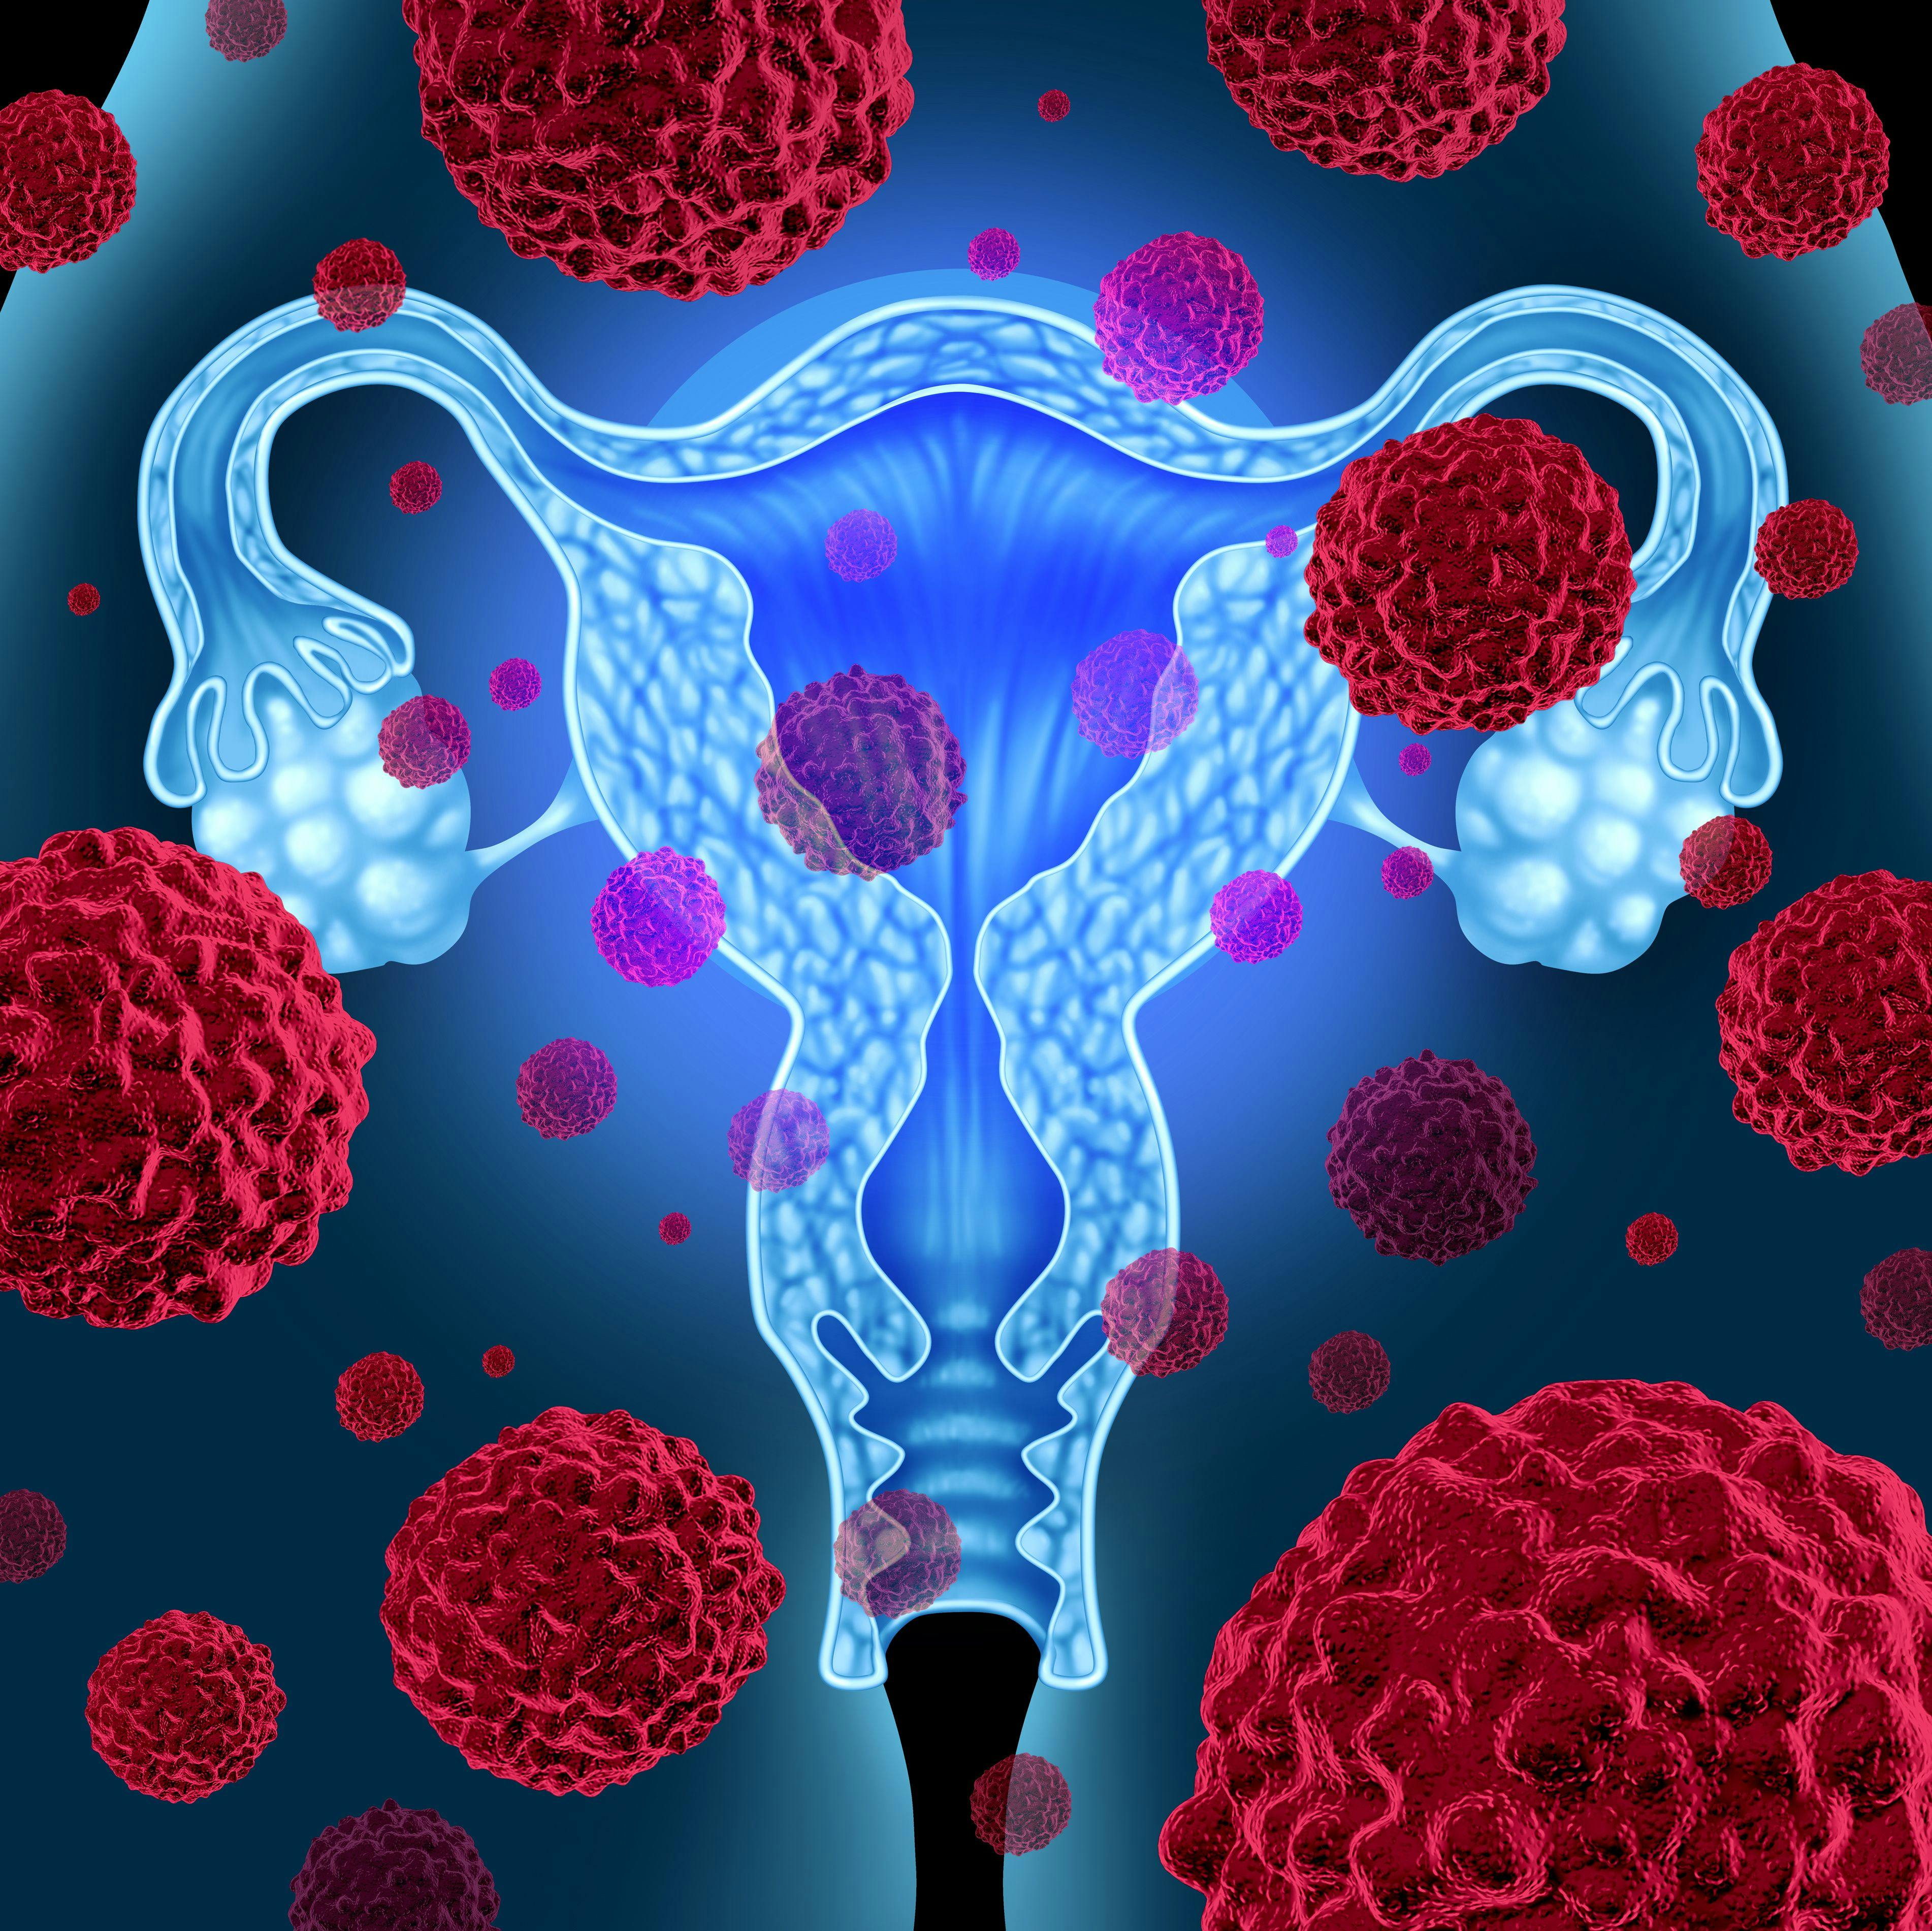 Illustration of female reproductive system and cancer cells - stock.adobe.com